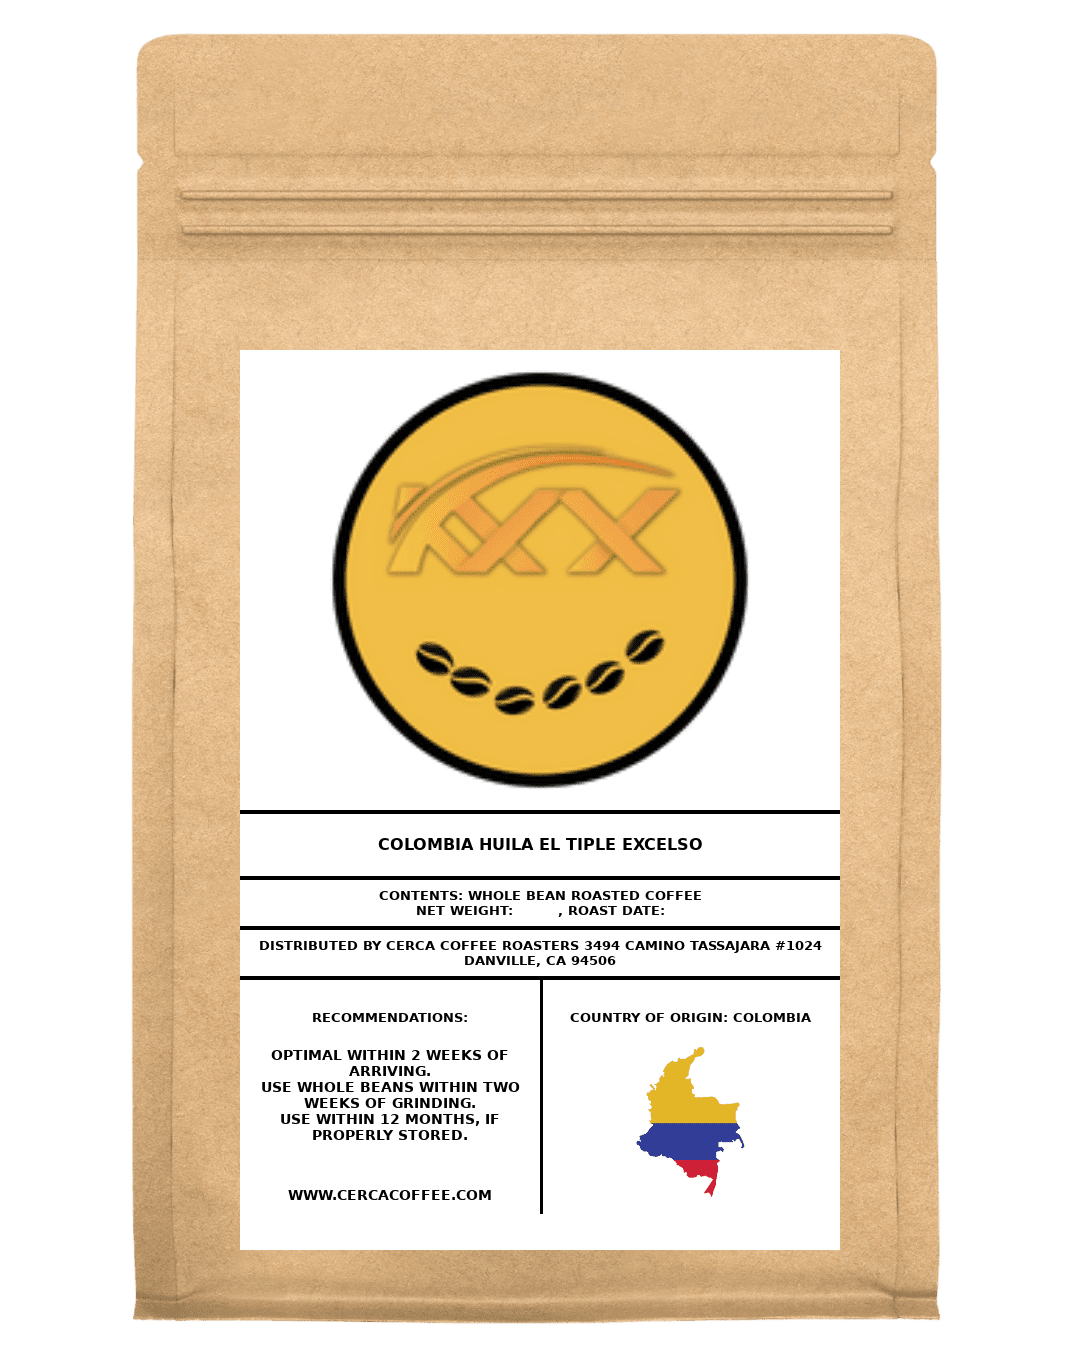 Colombia Huila El Tiple Excelso - KXX